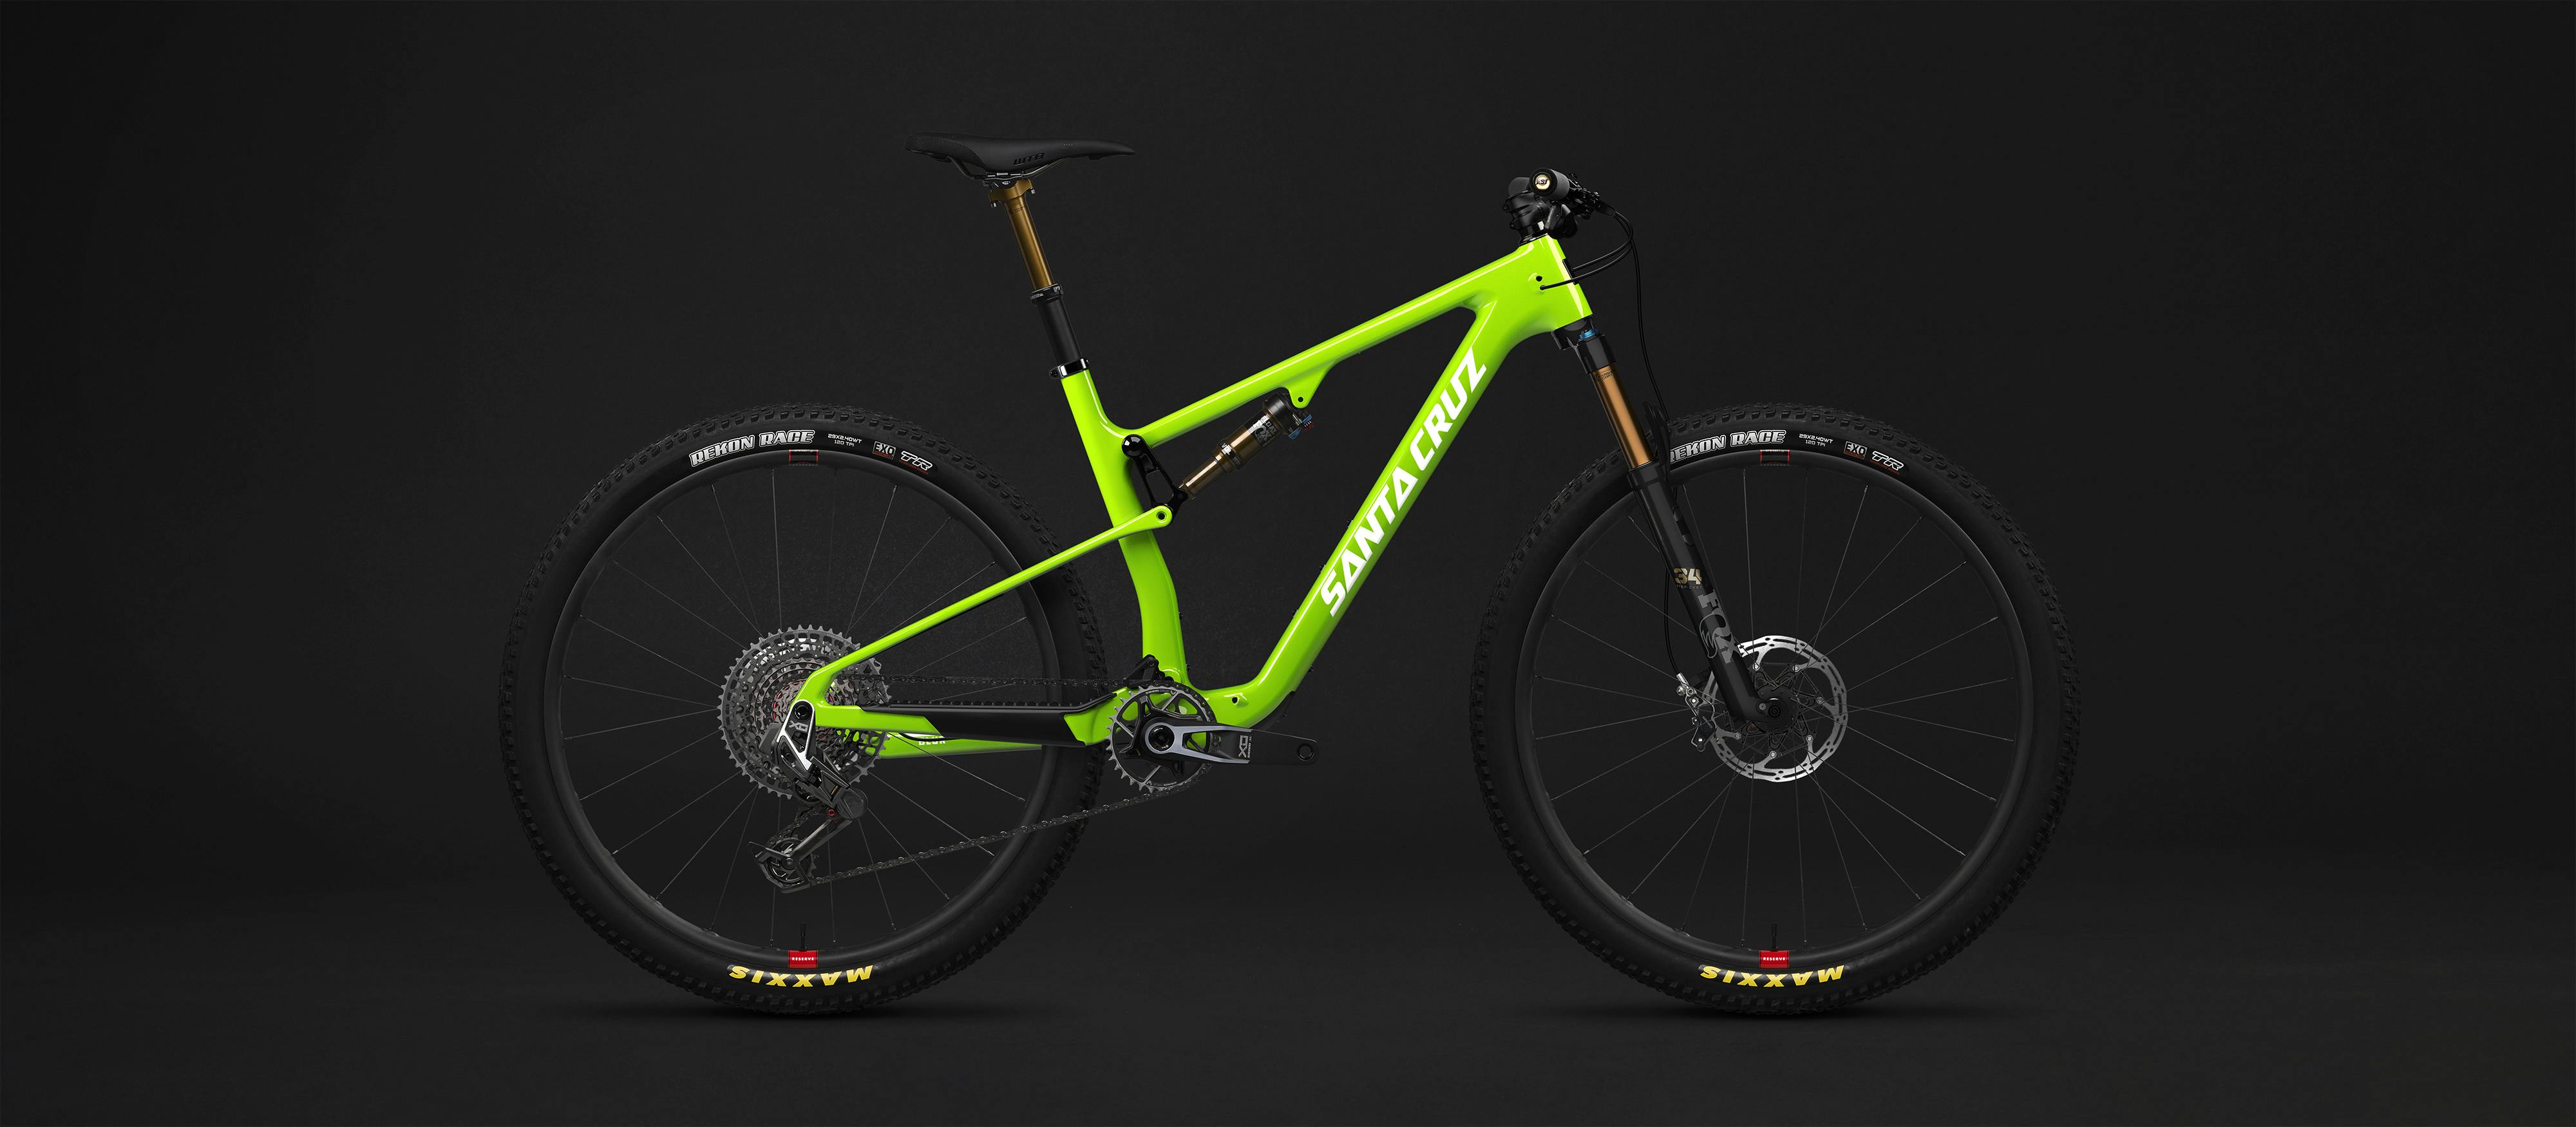 Trail Tech Cycles - South African Online Bicycle Store - Free Delivery